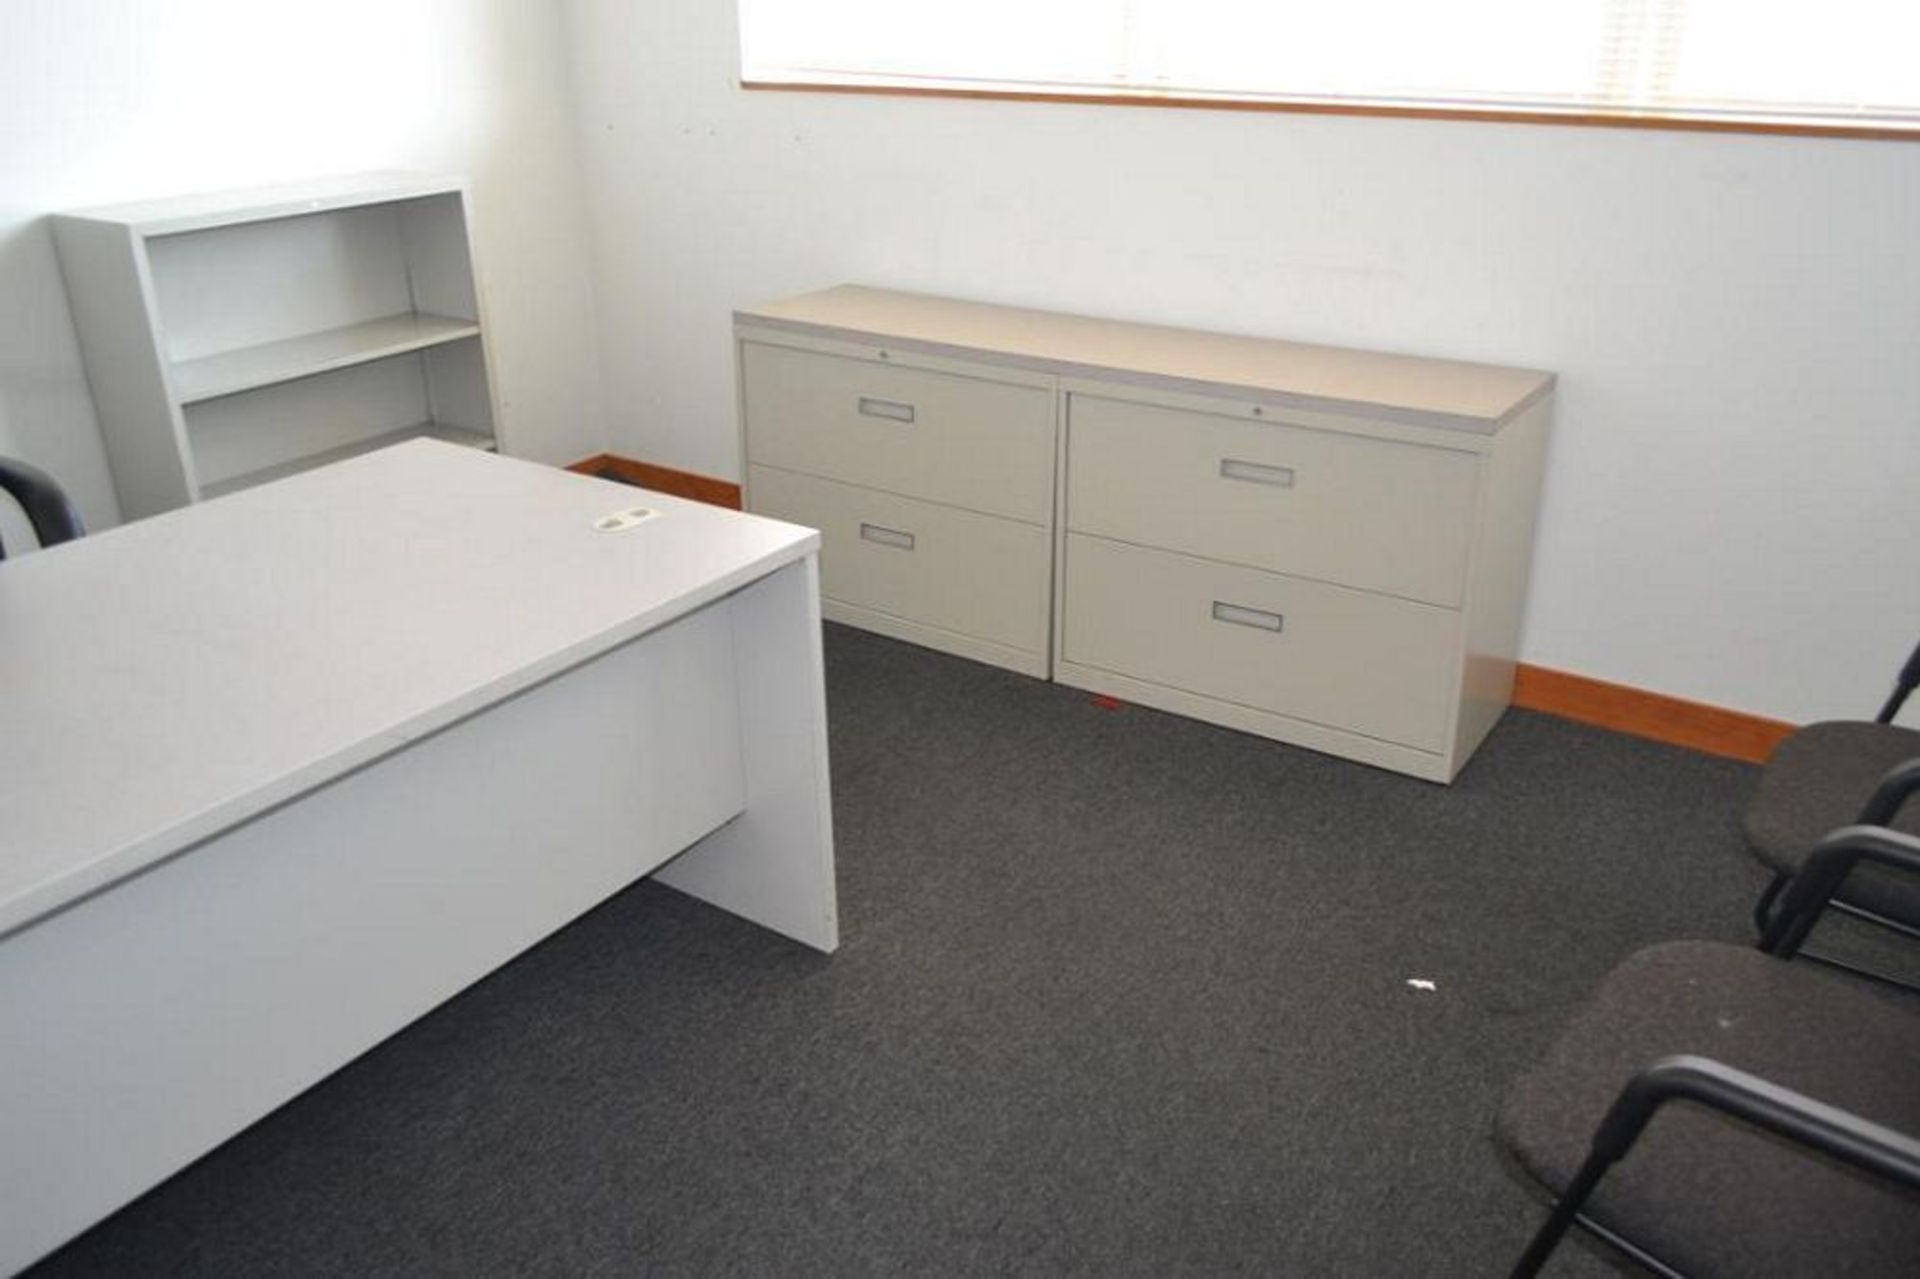 LOT: Contents of (3) Offices including (3) L-Shaped Desks, (3) File Cabinets, (9) Assorted Chairs - Image 6 of 7